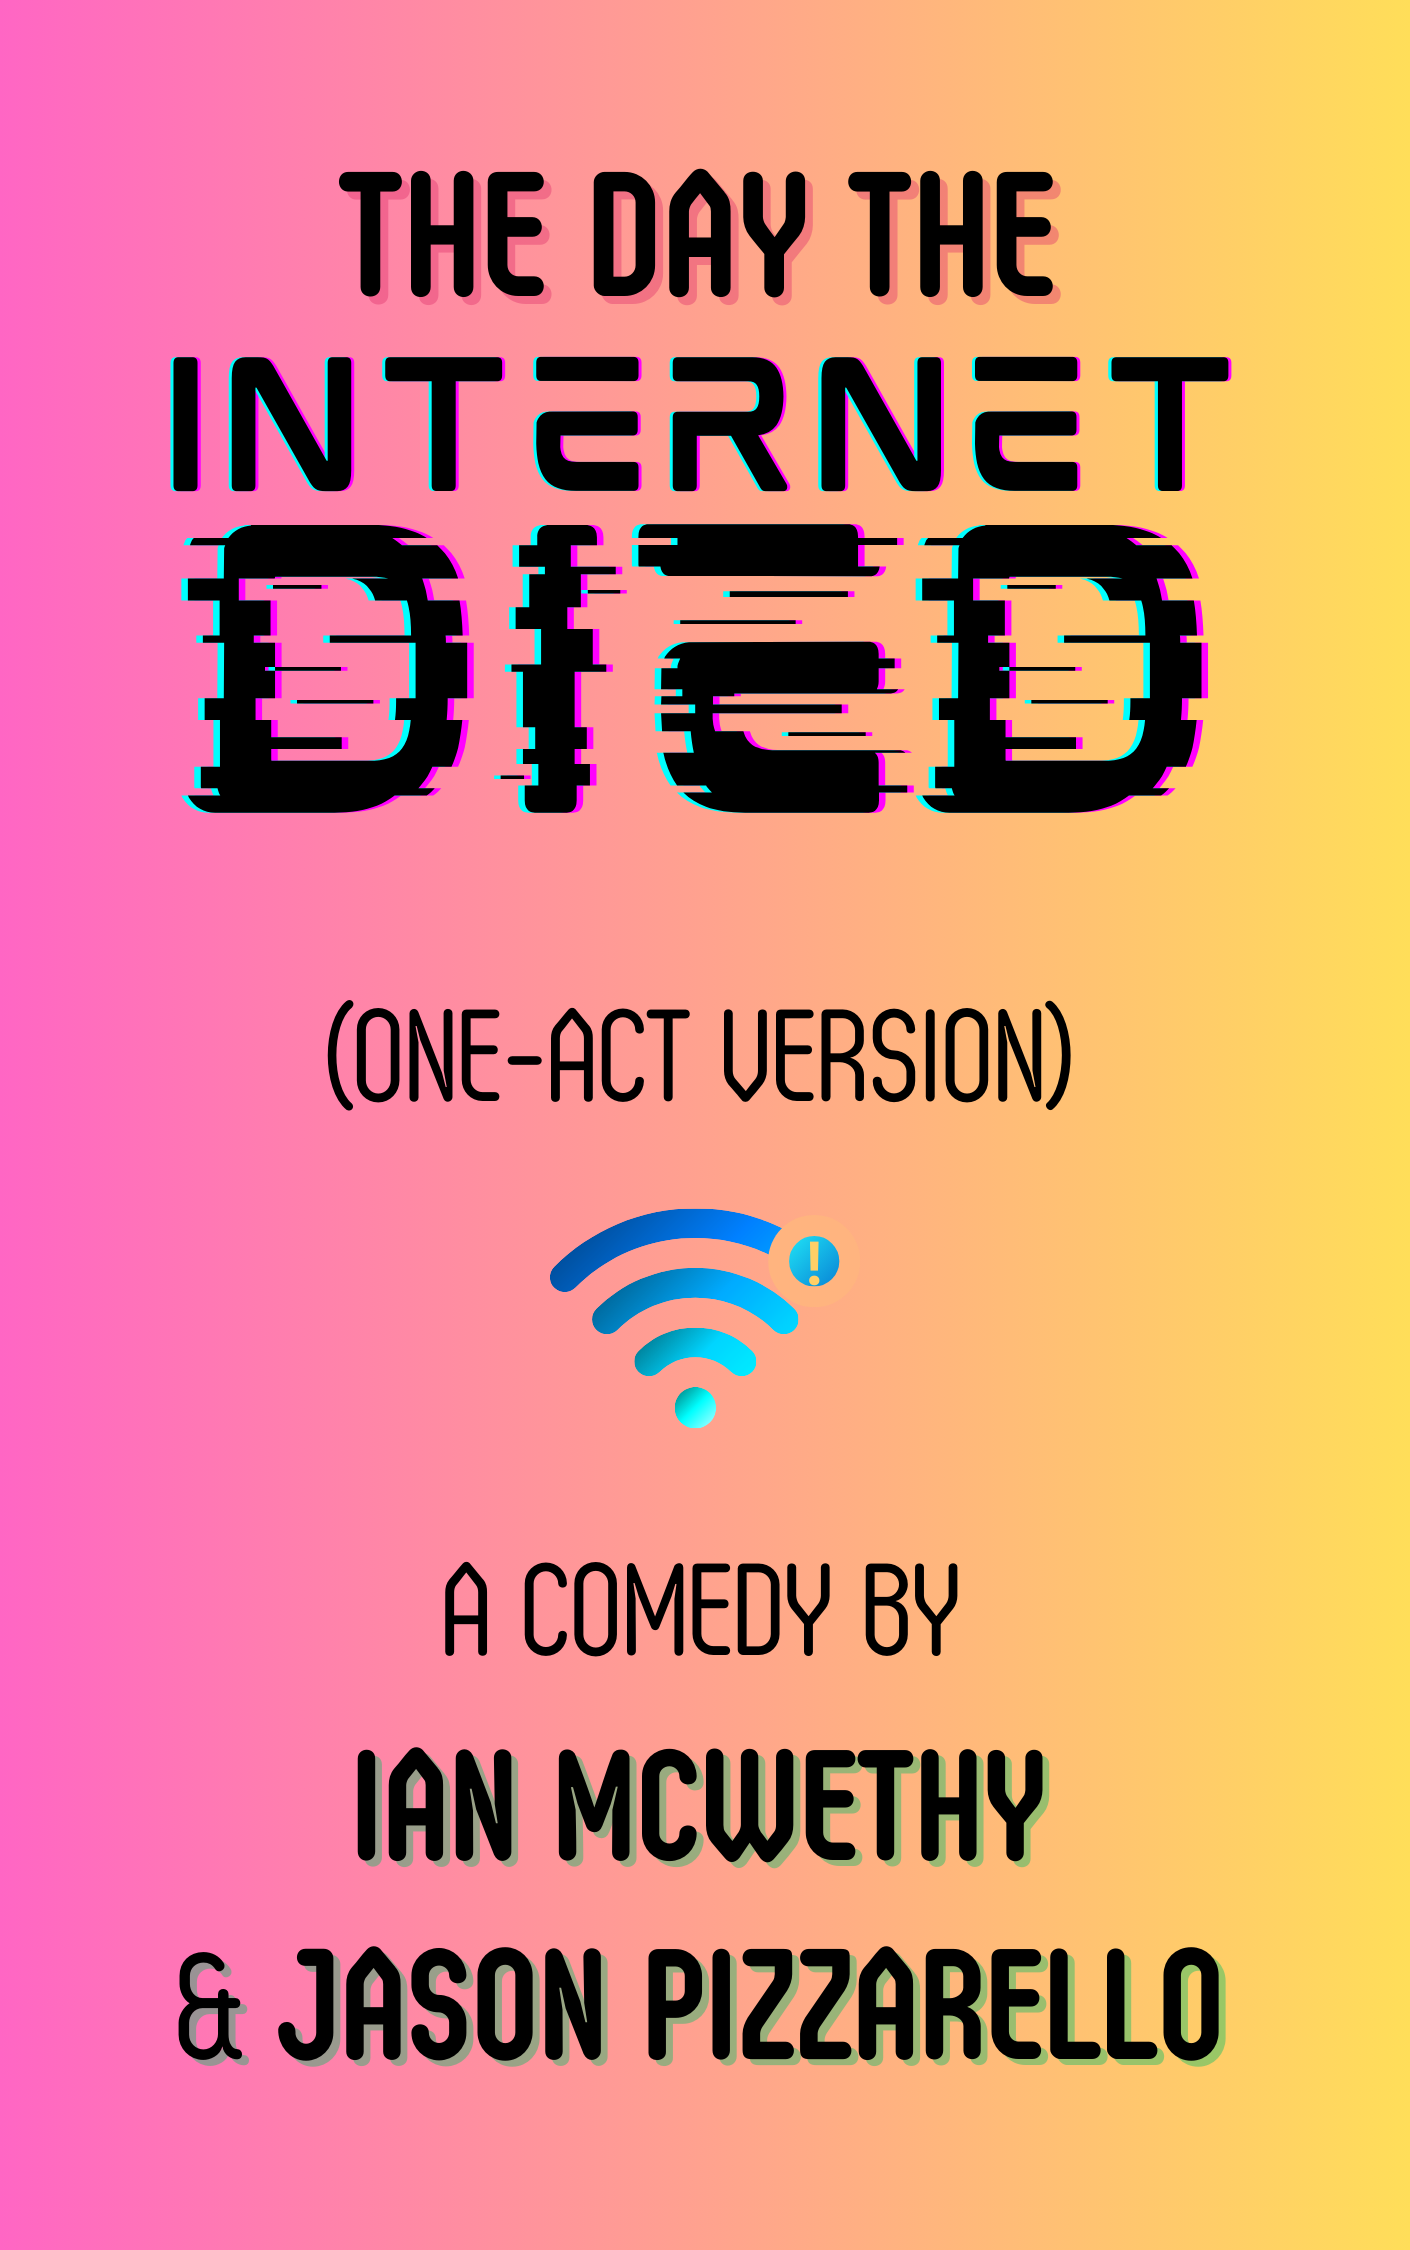 The Day the Internet Died one-act play